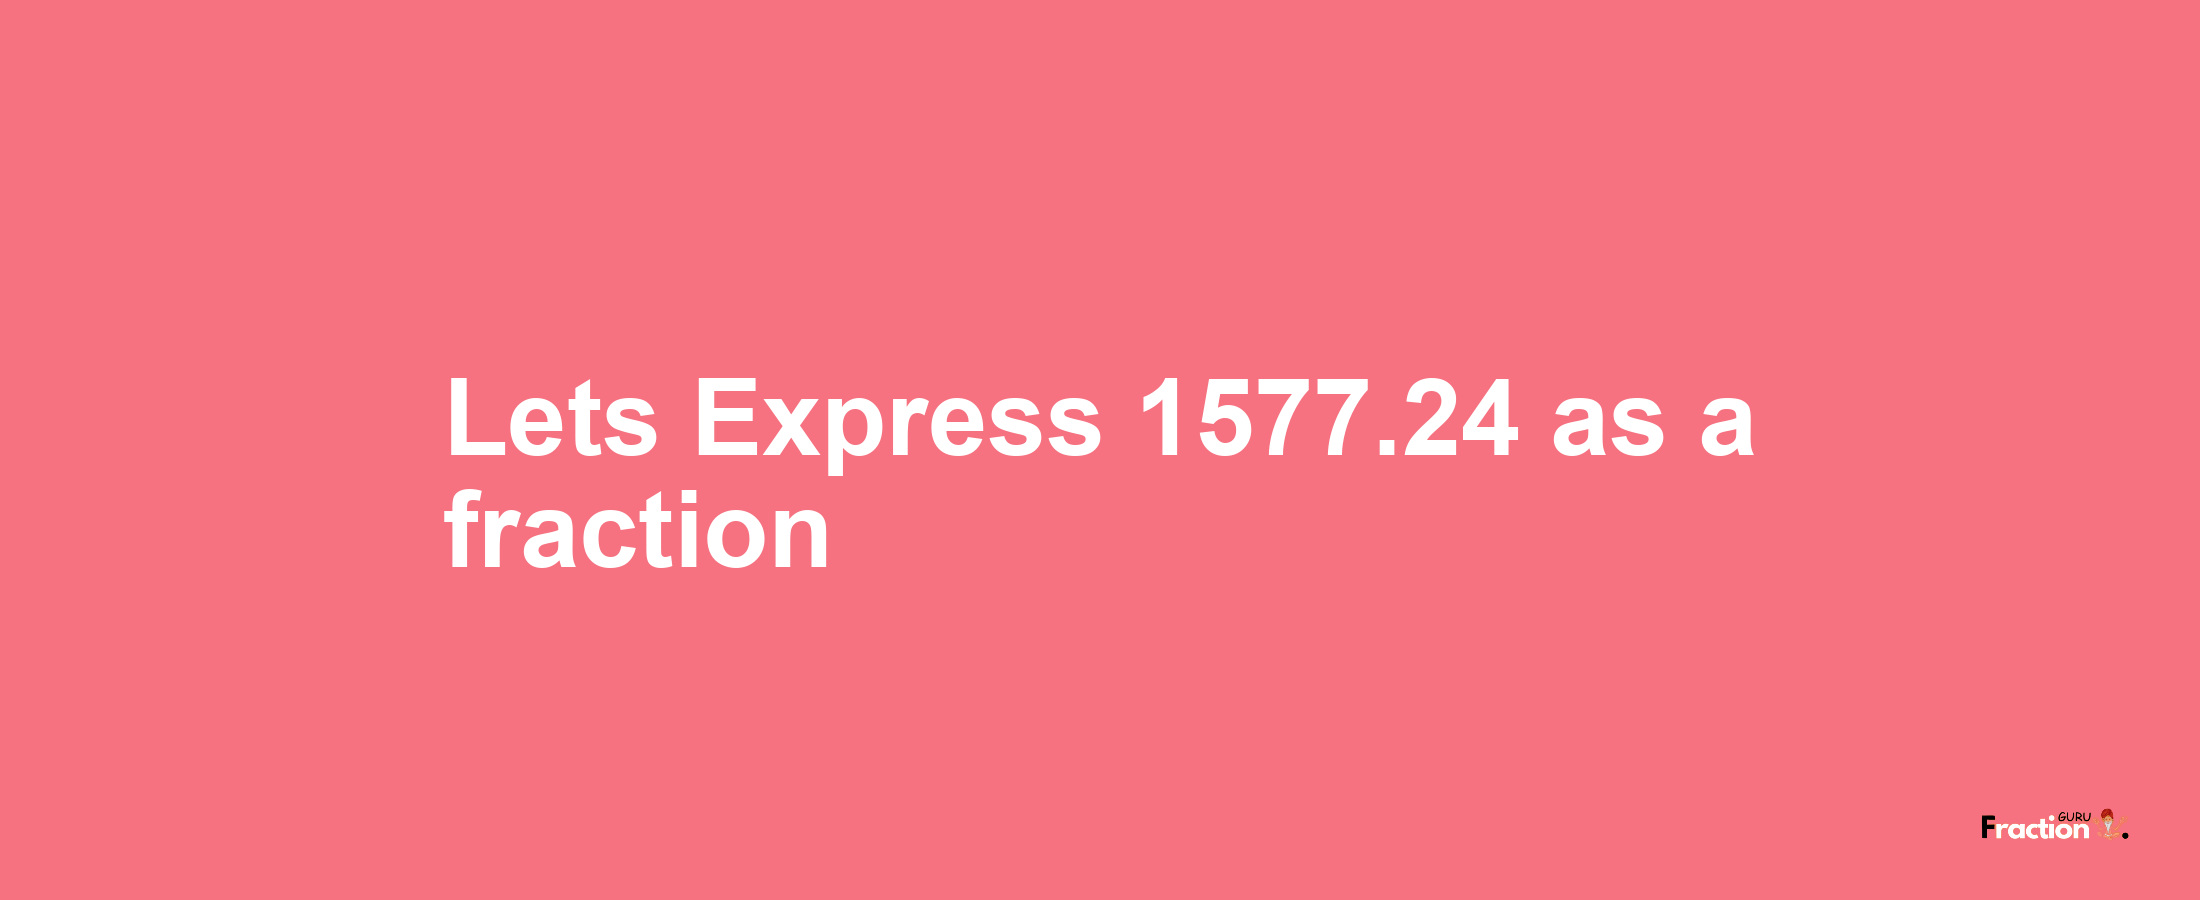 Lets Express 1577.24 as afraction